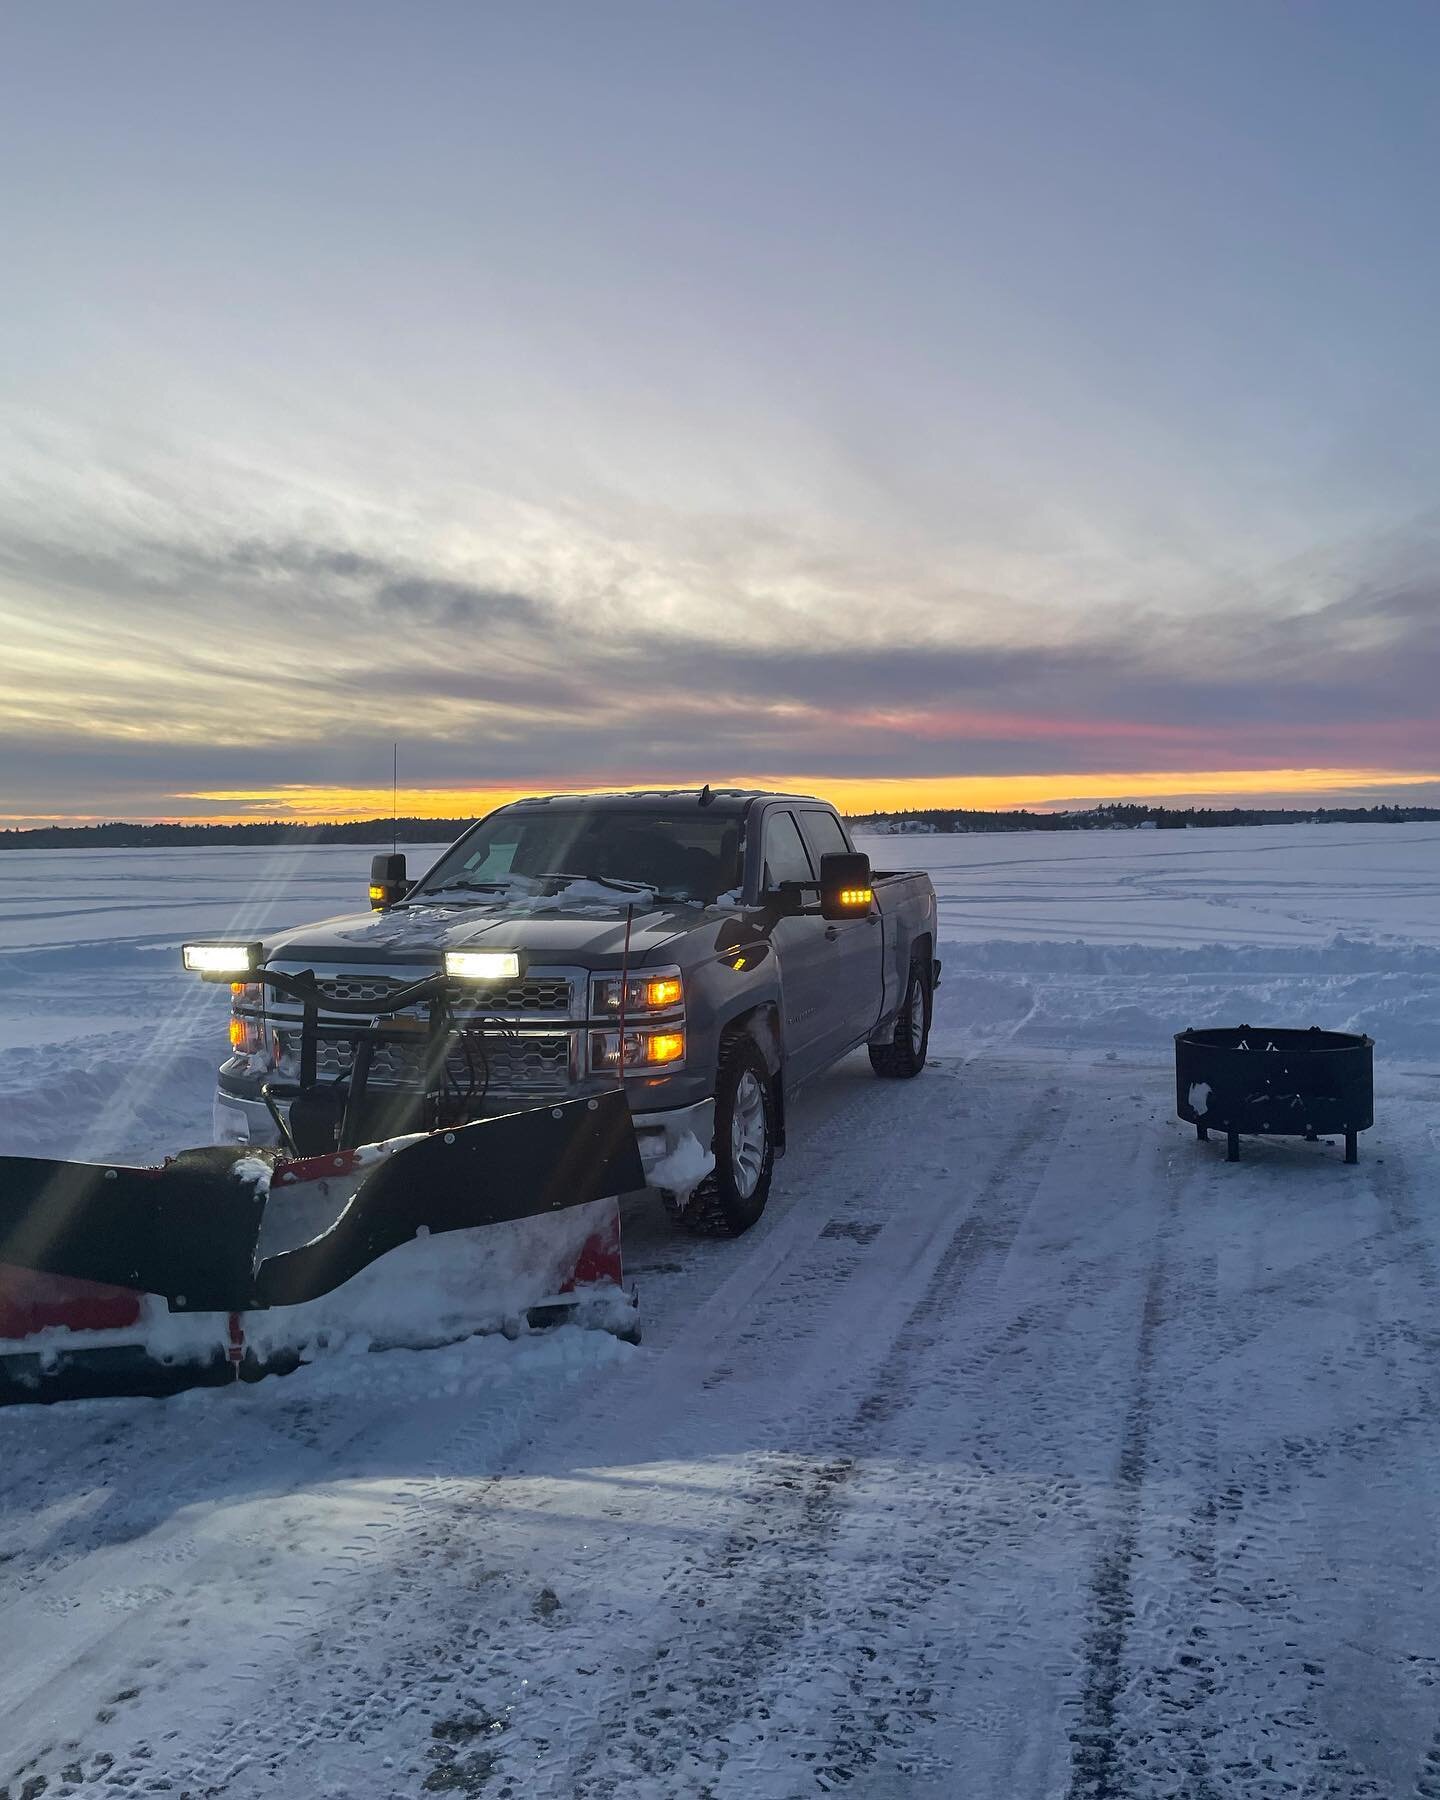 Another beauty evening on the lake preparing for this incredible season!! We&rsquo;re super pumped to be on the ice and hope you&rsquo;ll join us soon!! Lake trout season has begun and the bite is on!
#lakeofthewoods #lotw #sunsetcountry